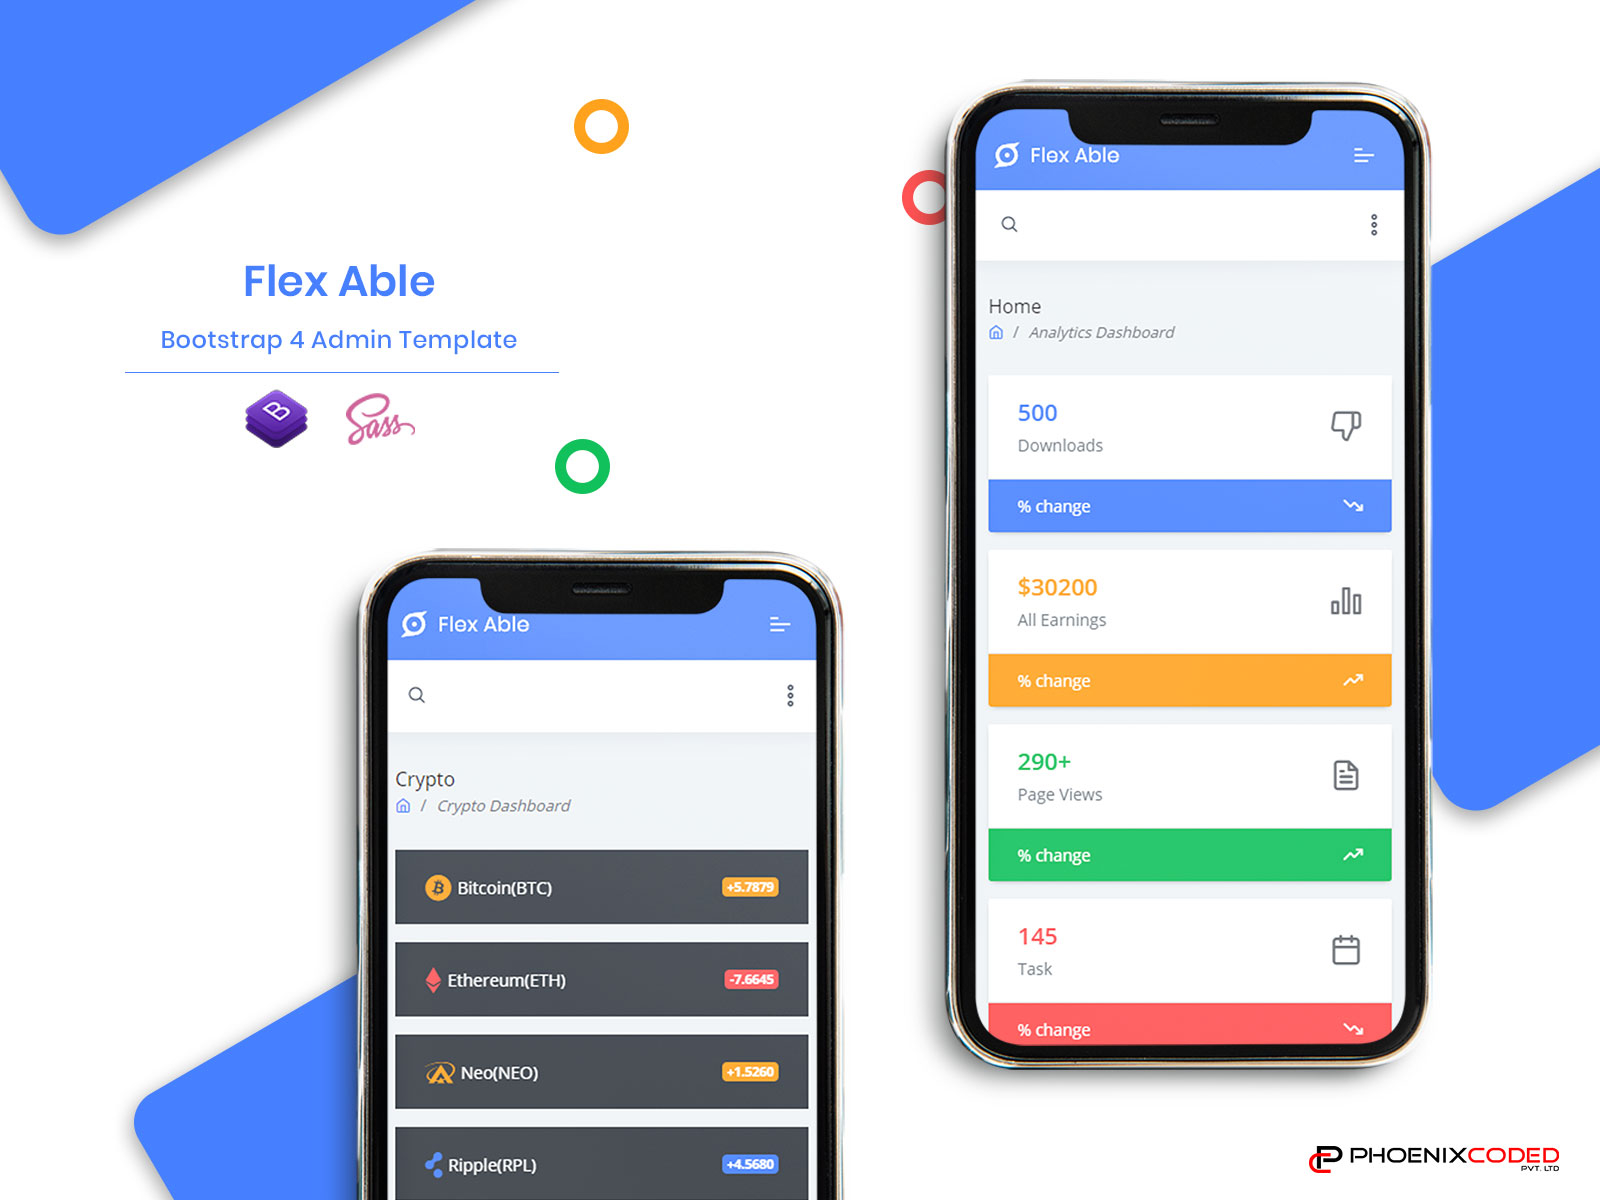 flex-able-bootstrap-4-admin-template-ui-kit-by-phoenixcoded-on-dribbble